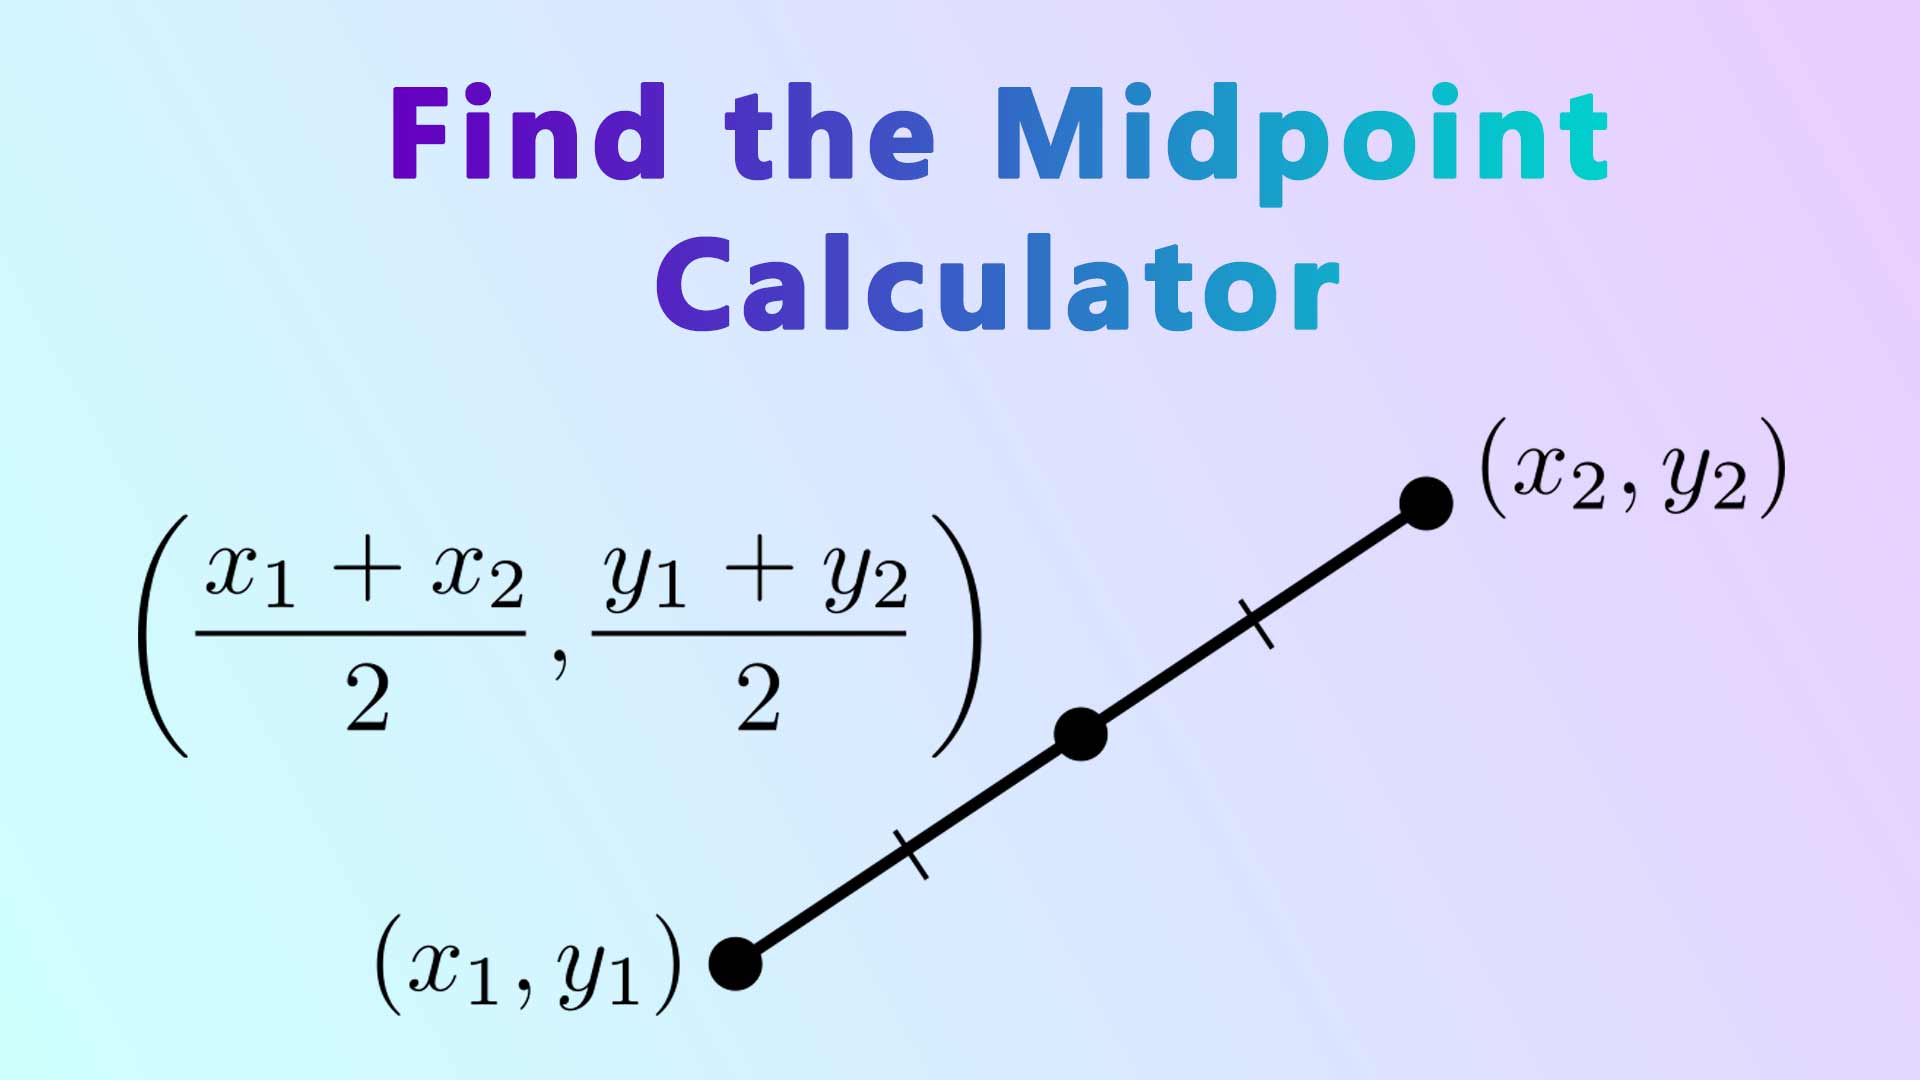 Find the Midpoint Calculator